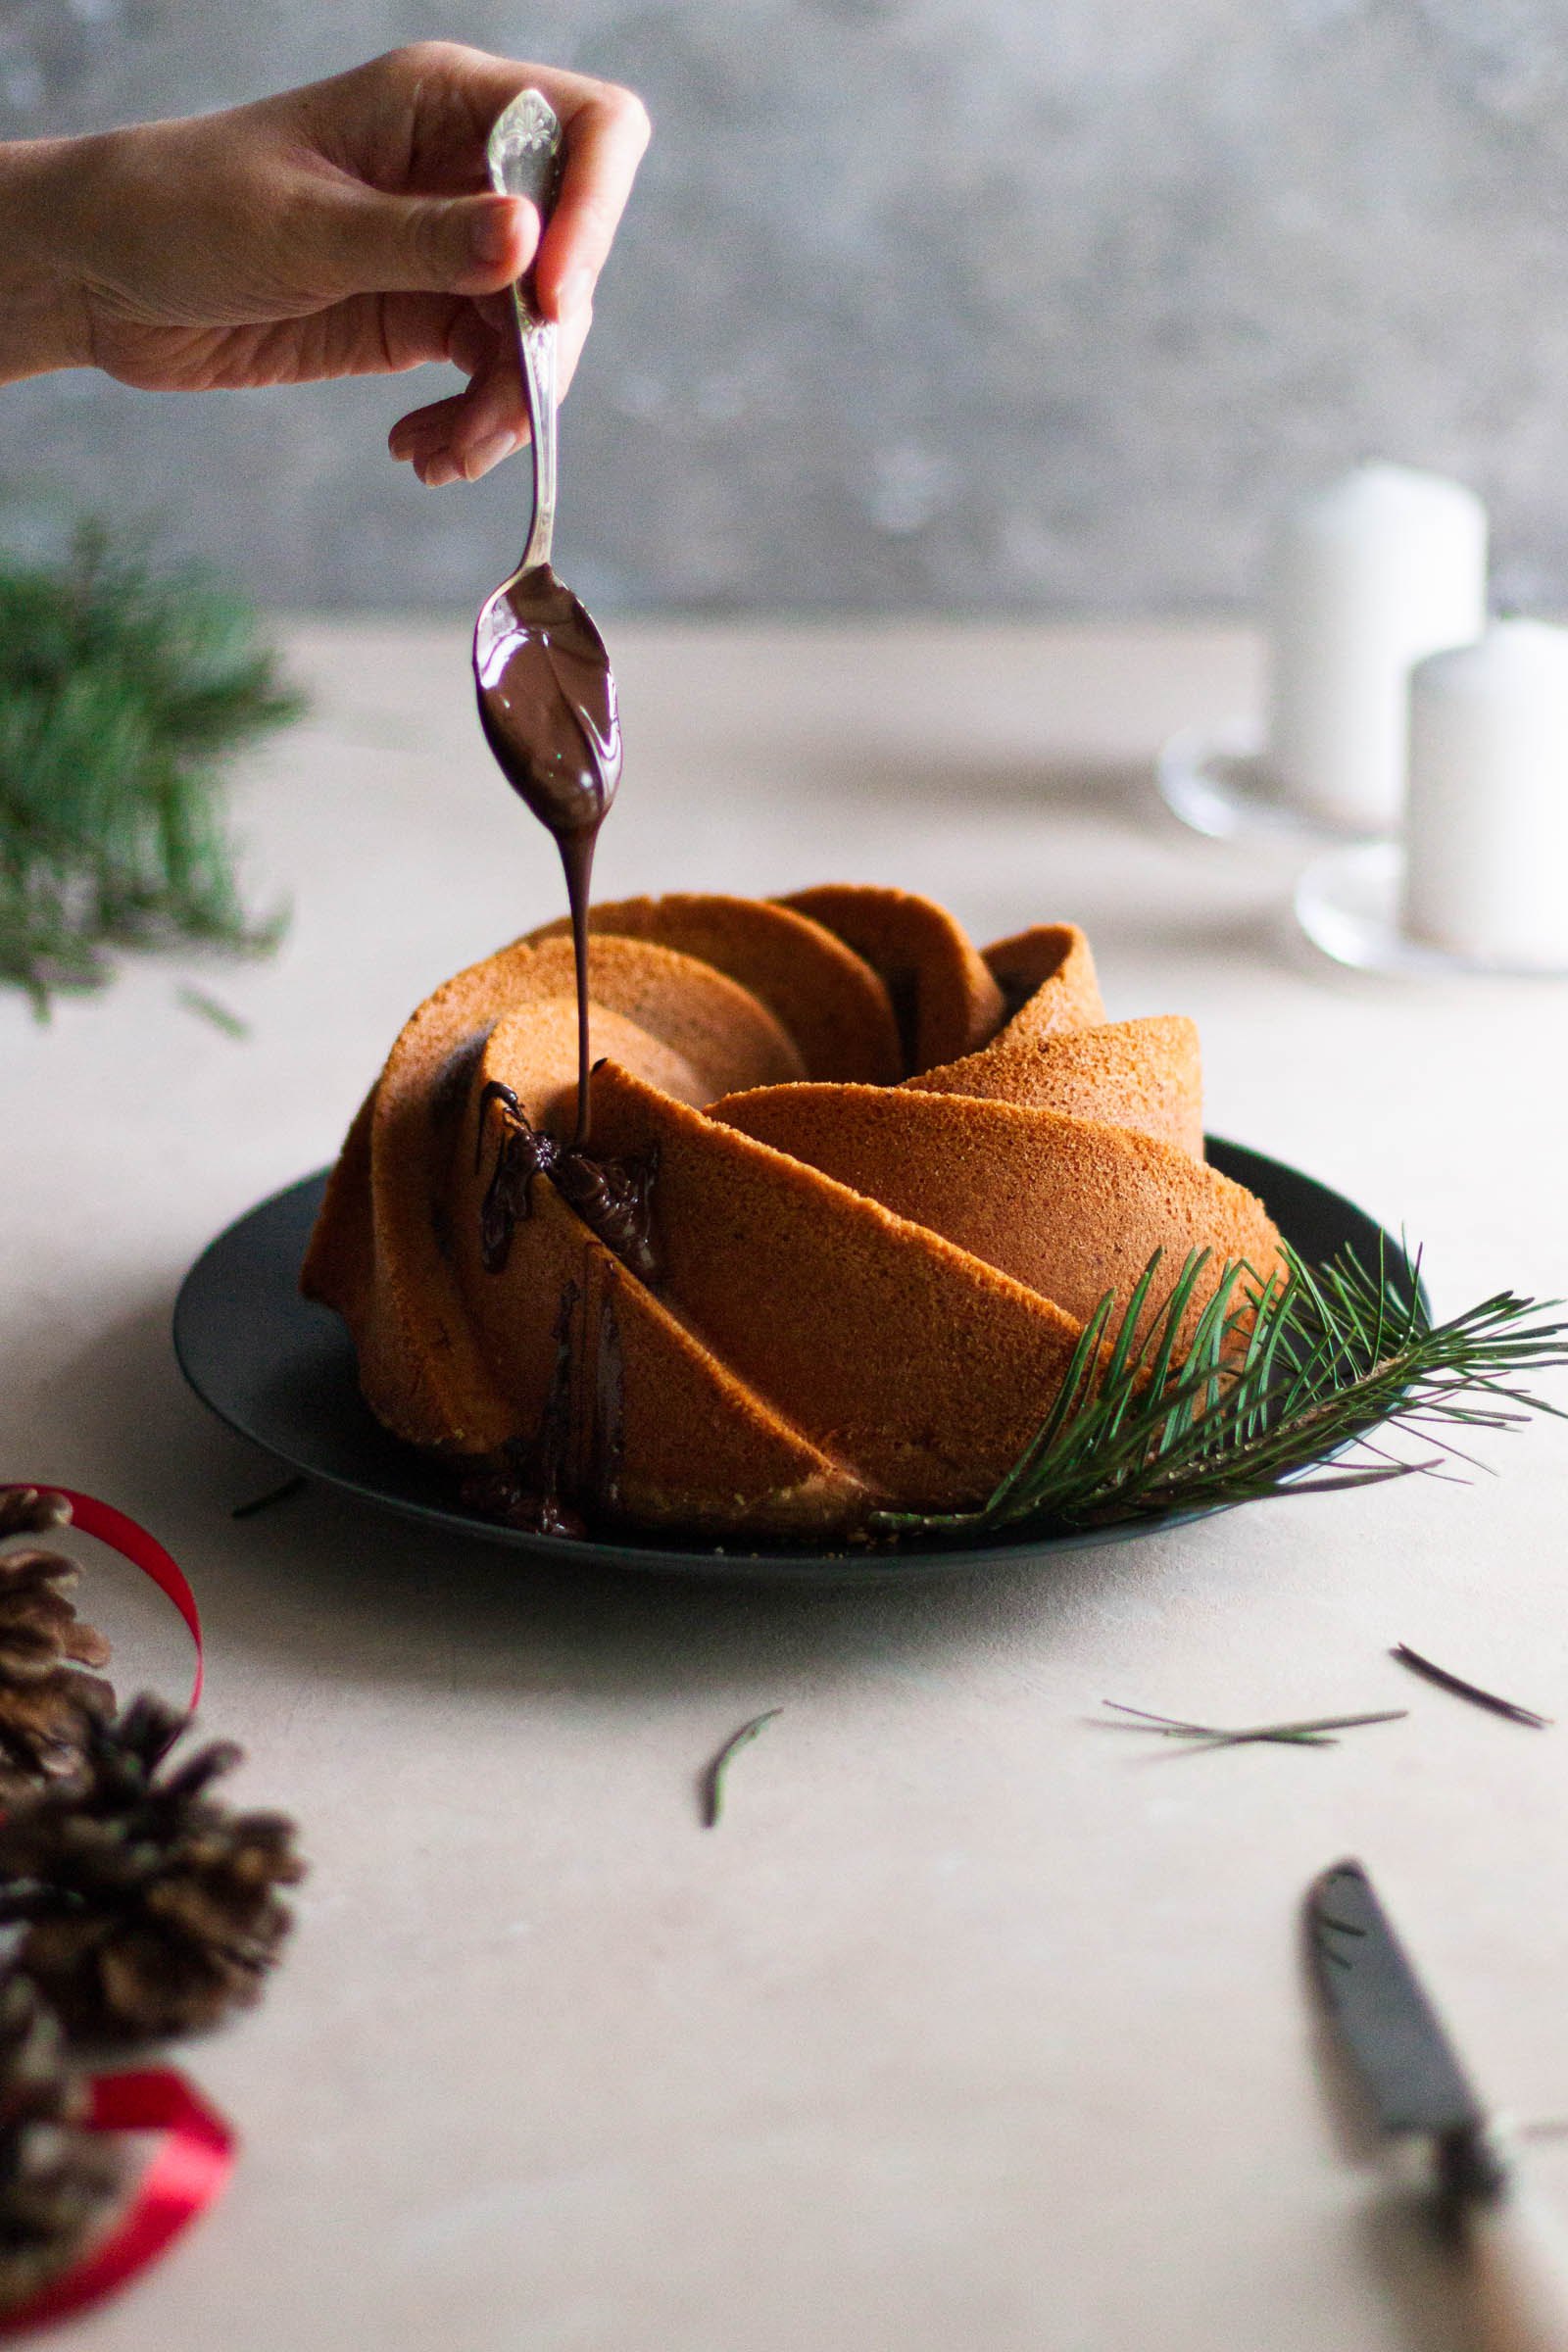 You are currently viewing Simple European Style Bundt Cake from Scratch